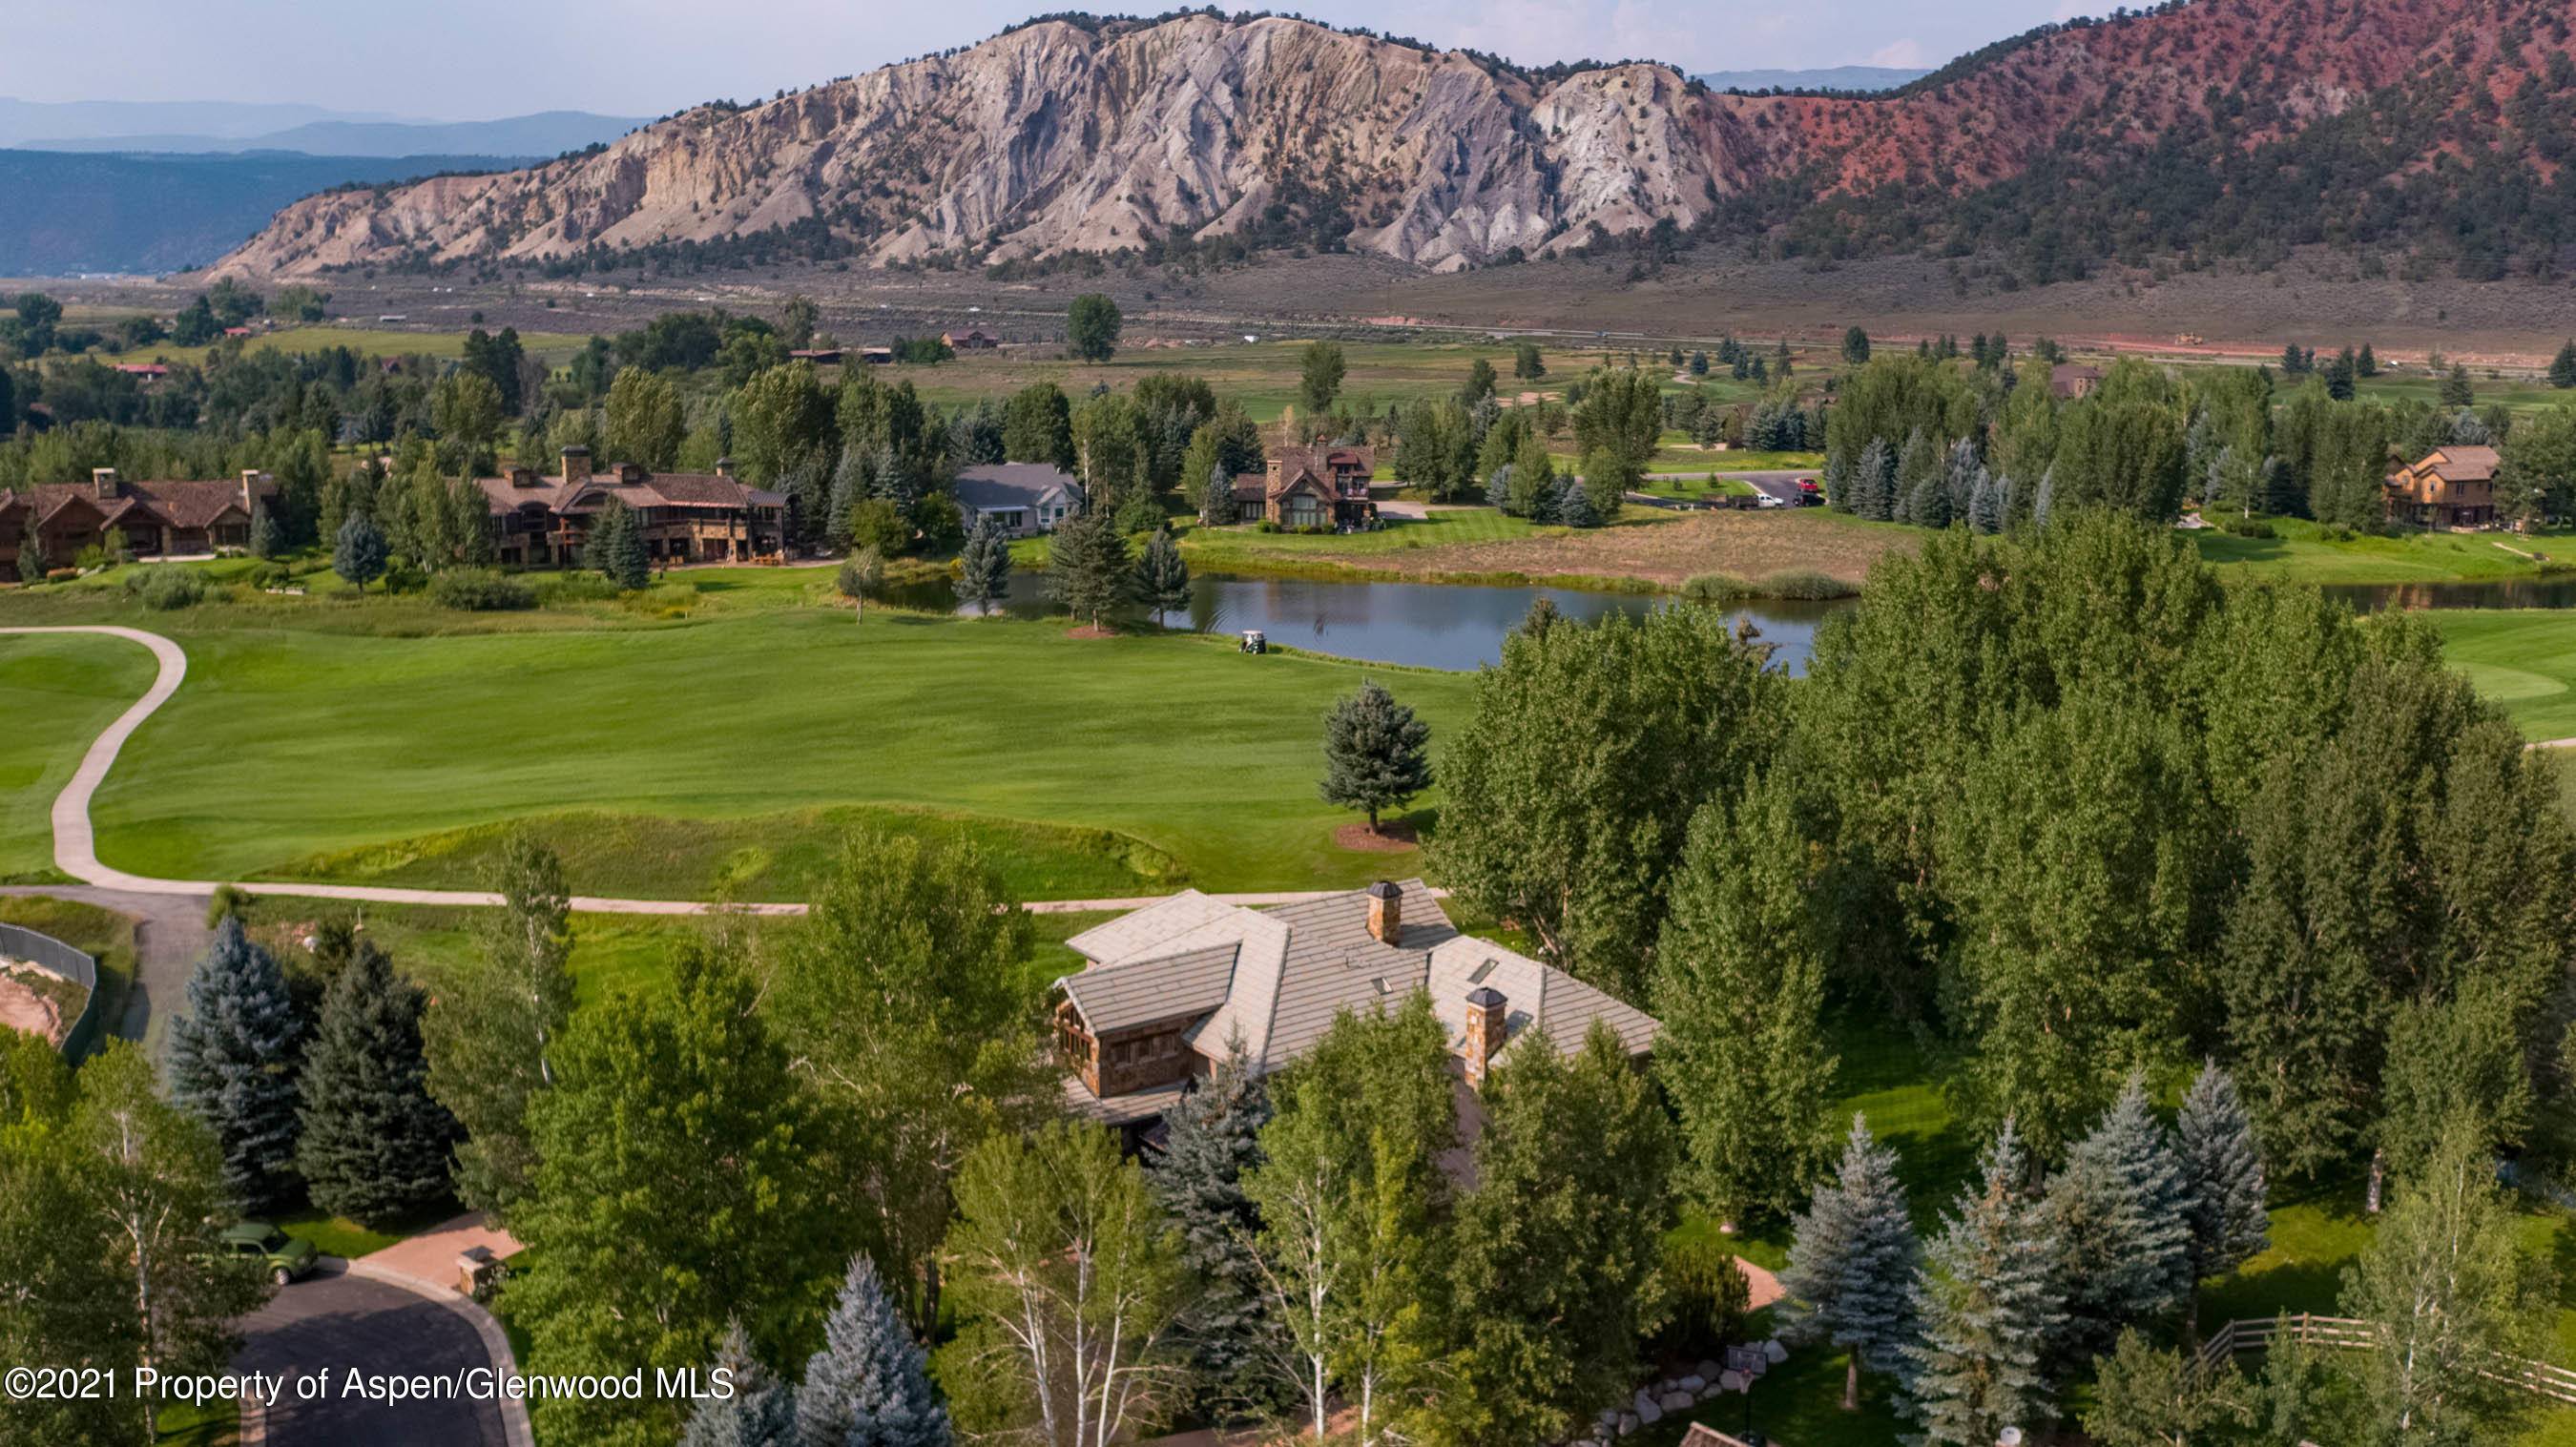 This quintessential, timeless, luxurious, spacious 5, 371 sq ft Colorado mountain home is situated on a 0.